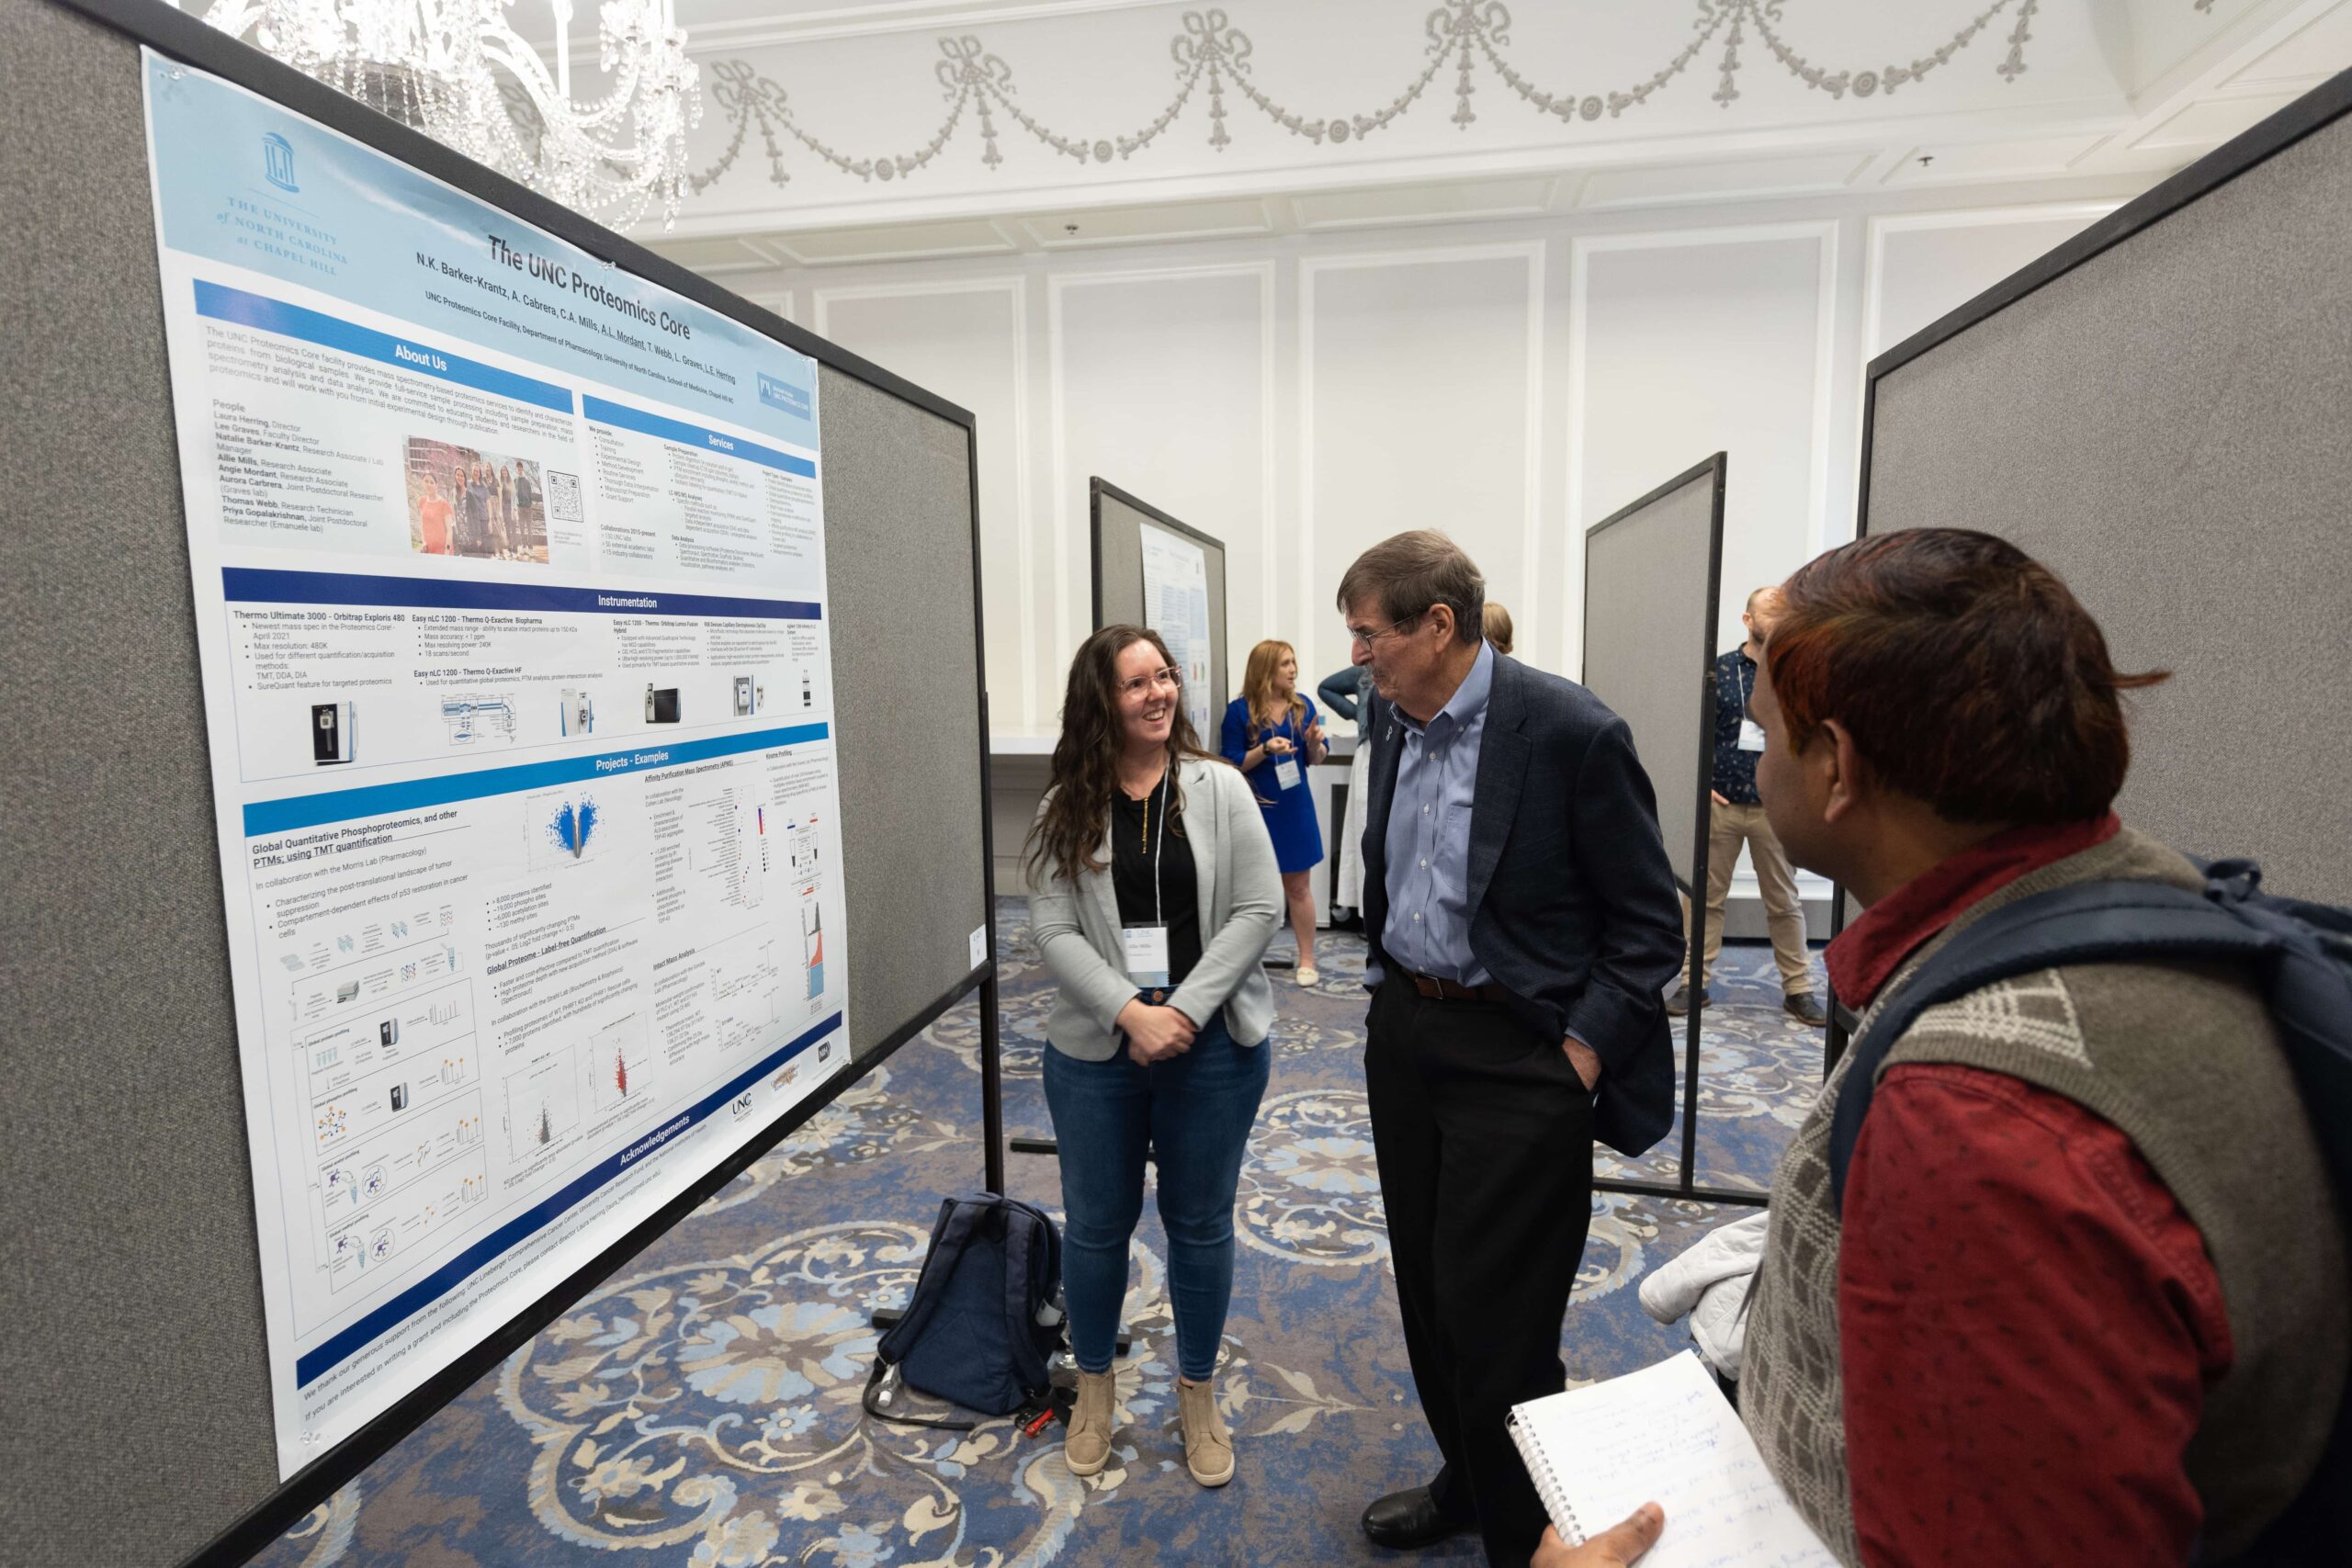 Three people gather around a scientific poster and discuss the UNC Proteomics Core facility